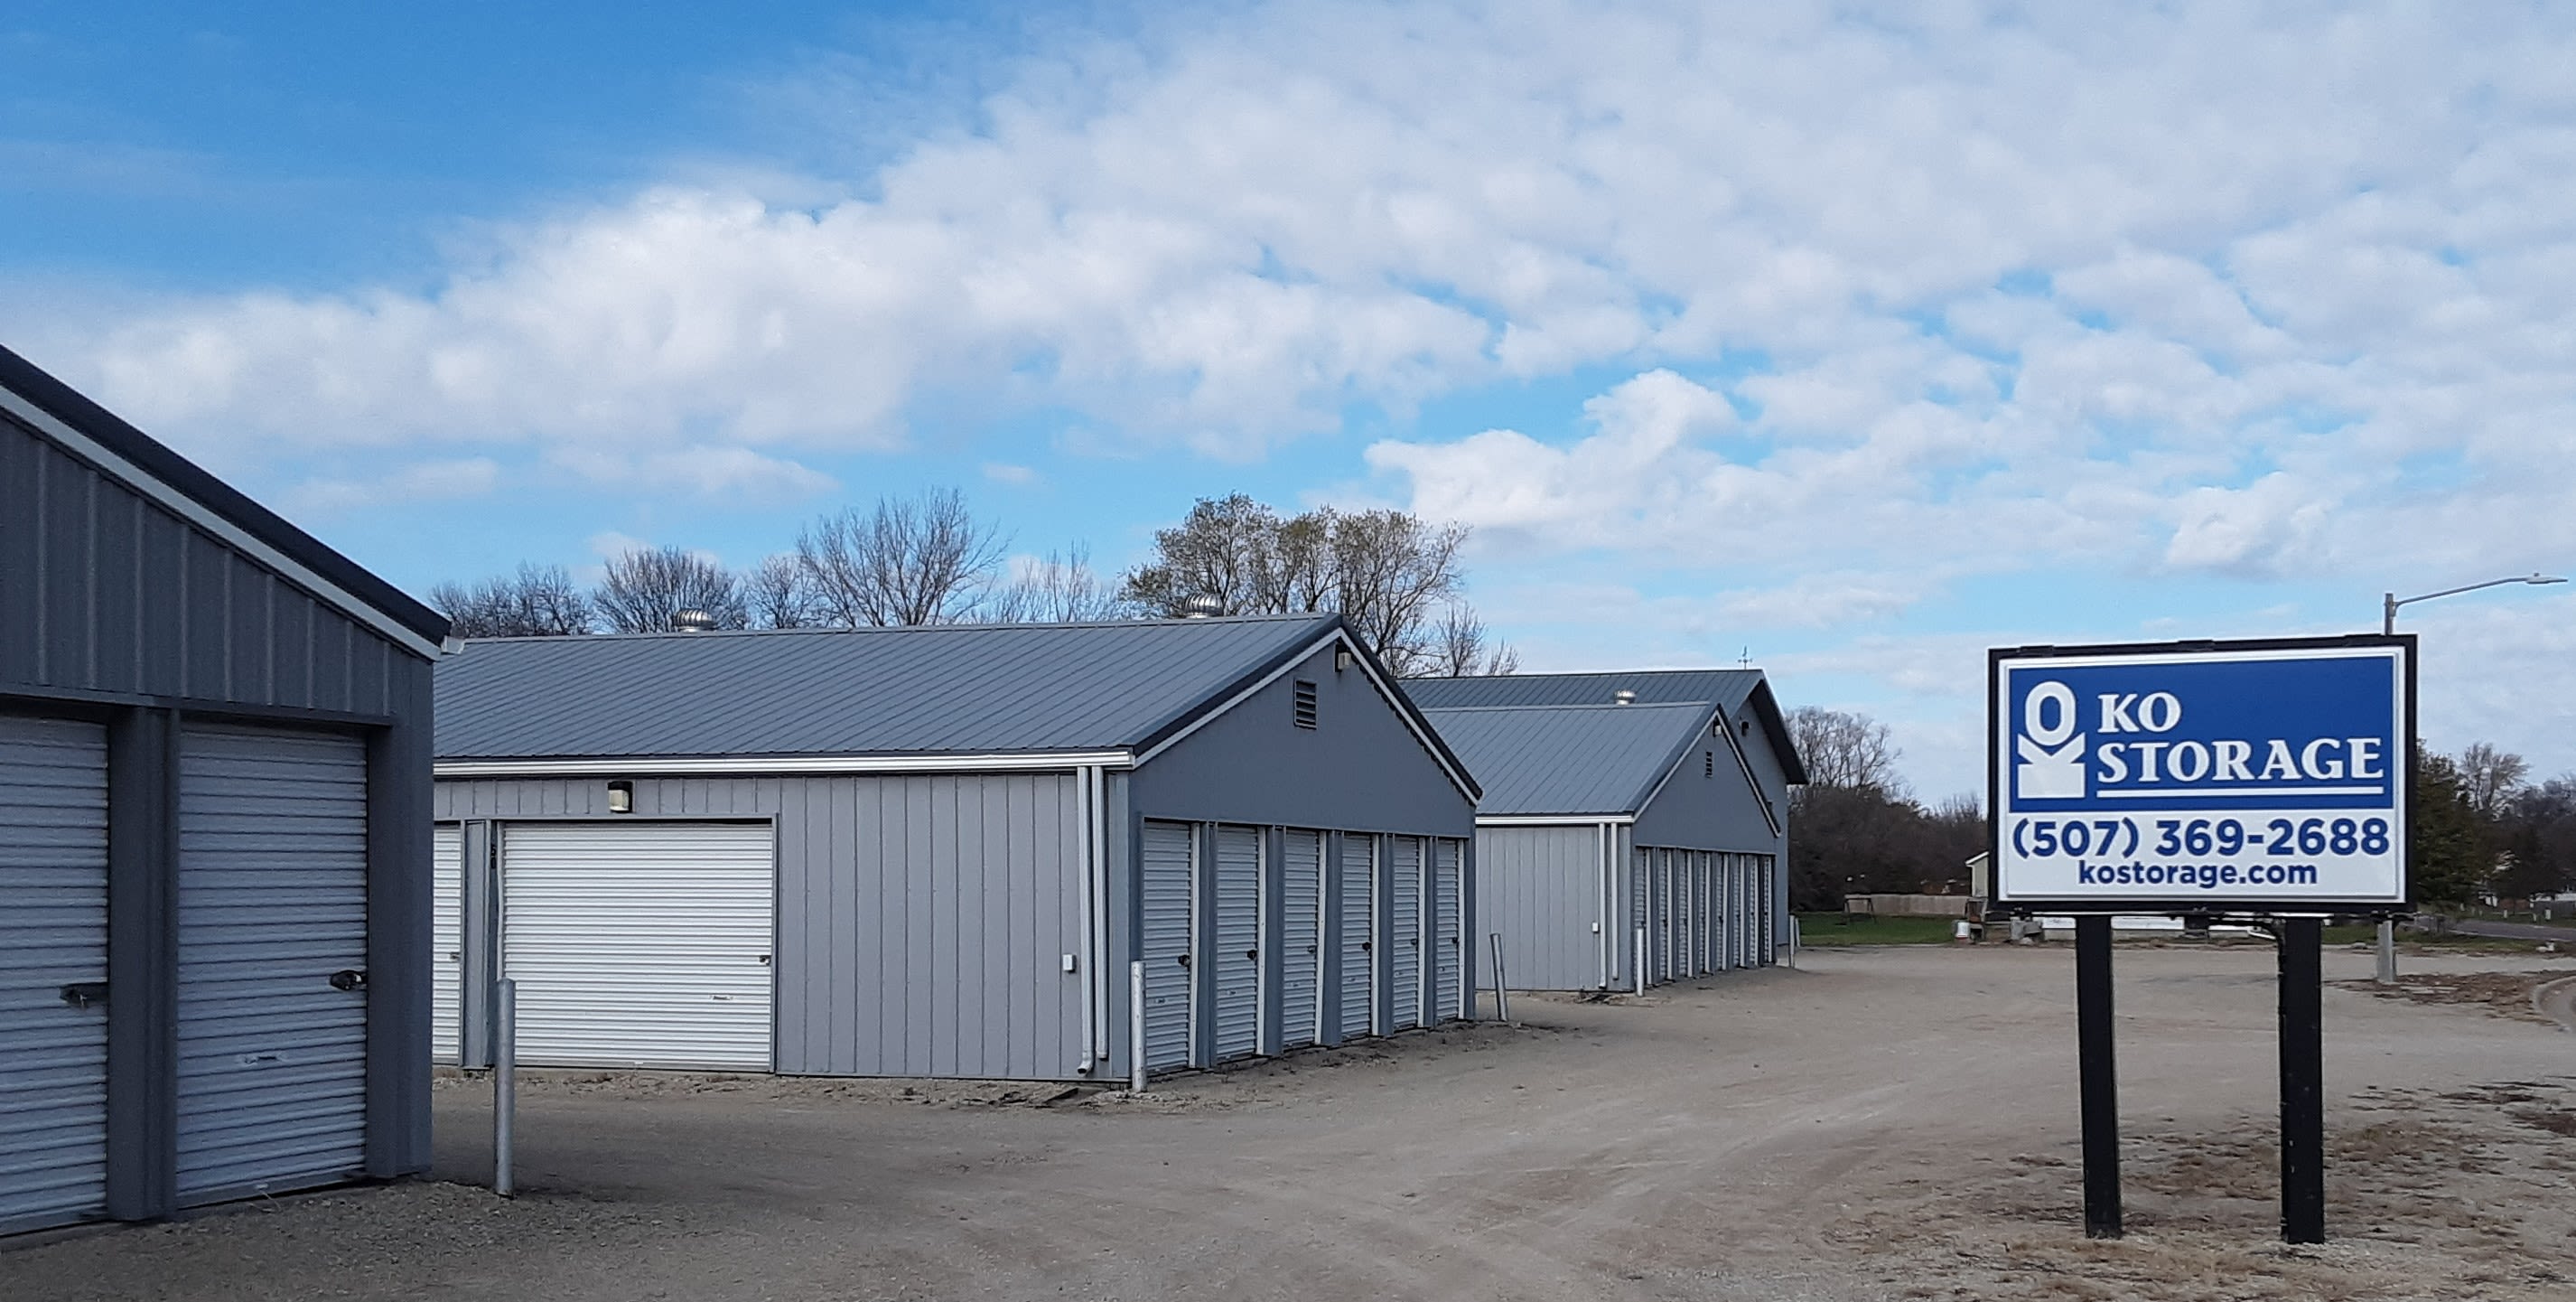 Features at KO Storage in Waseca, Minnesota